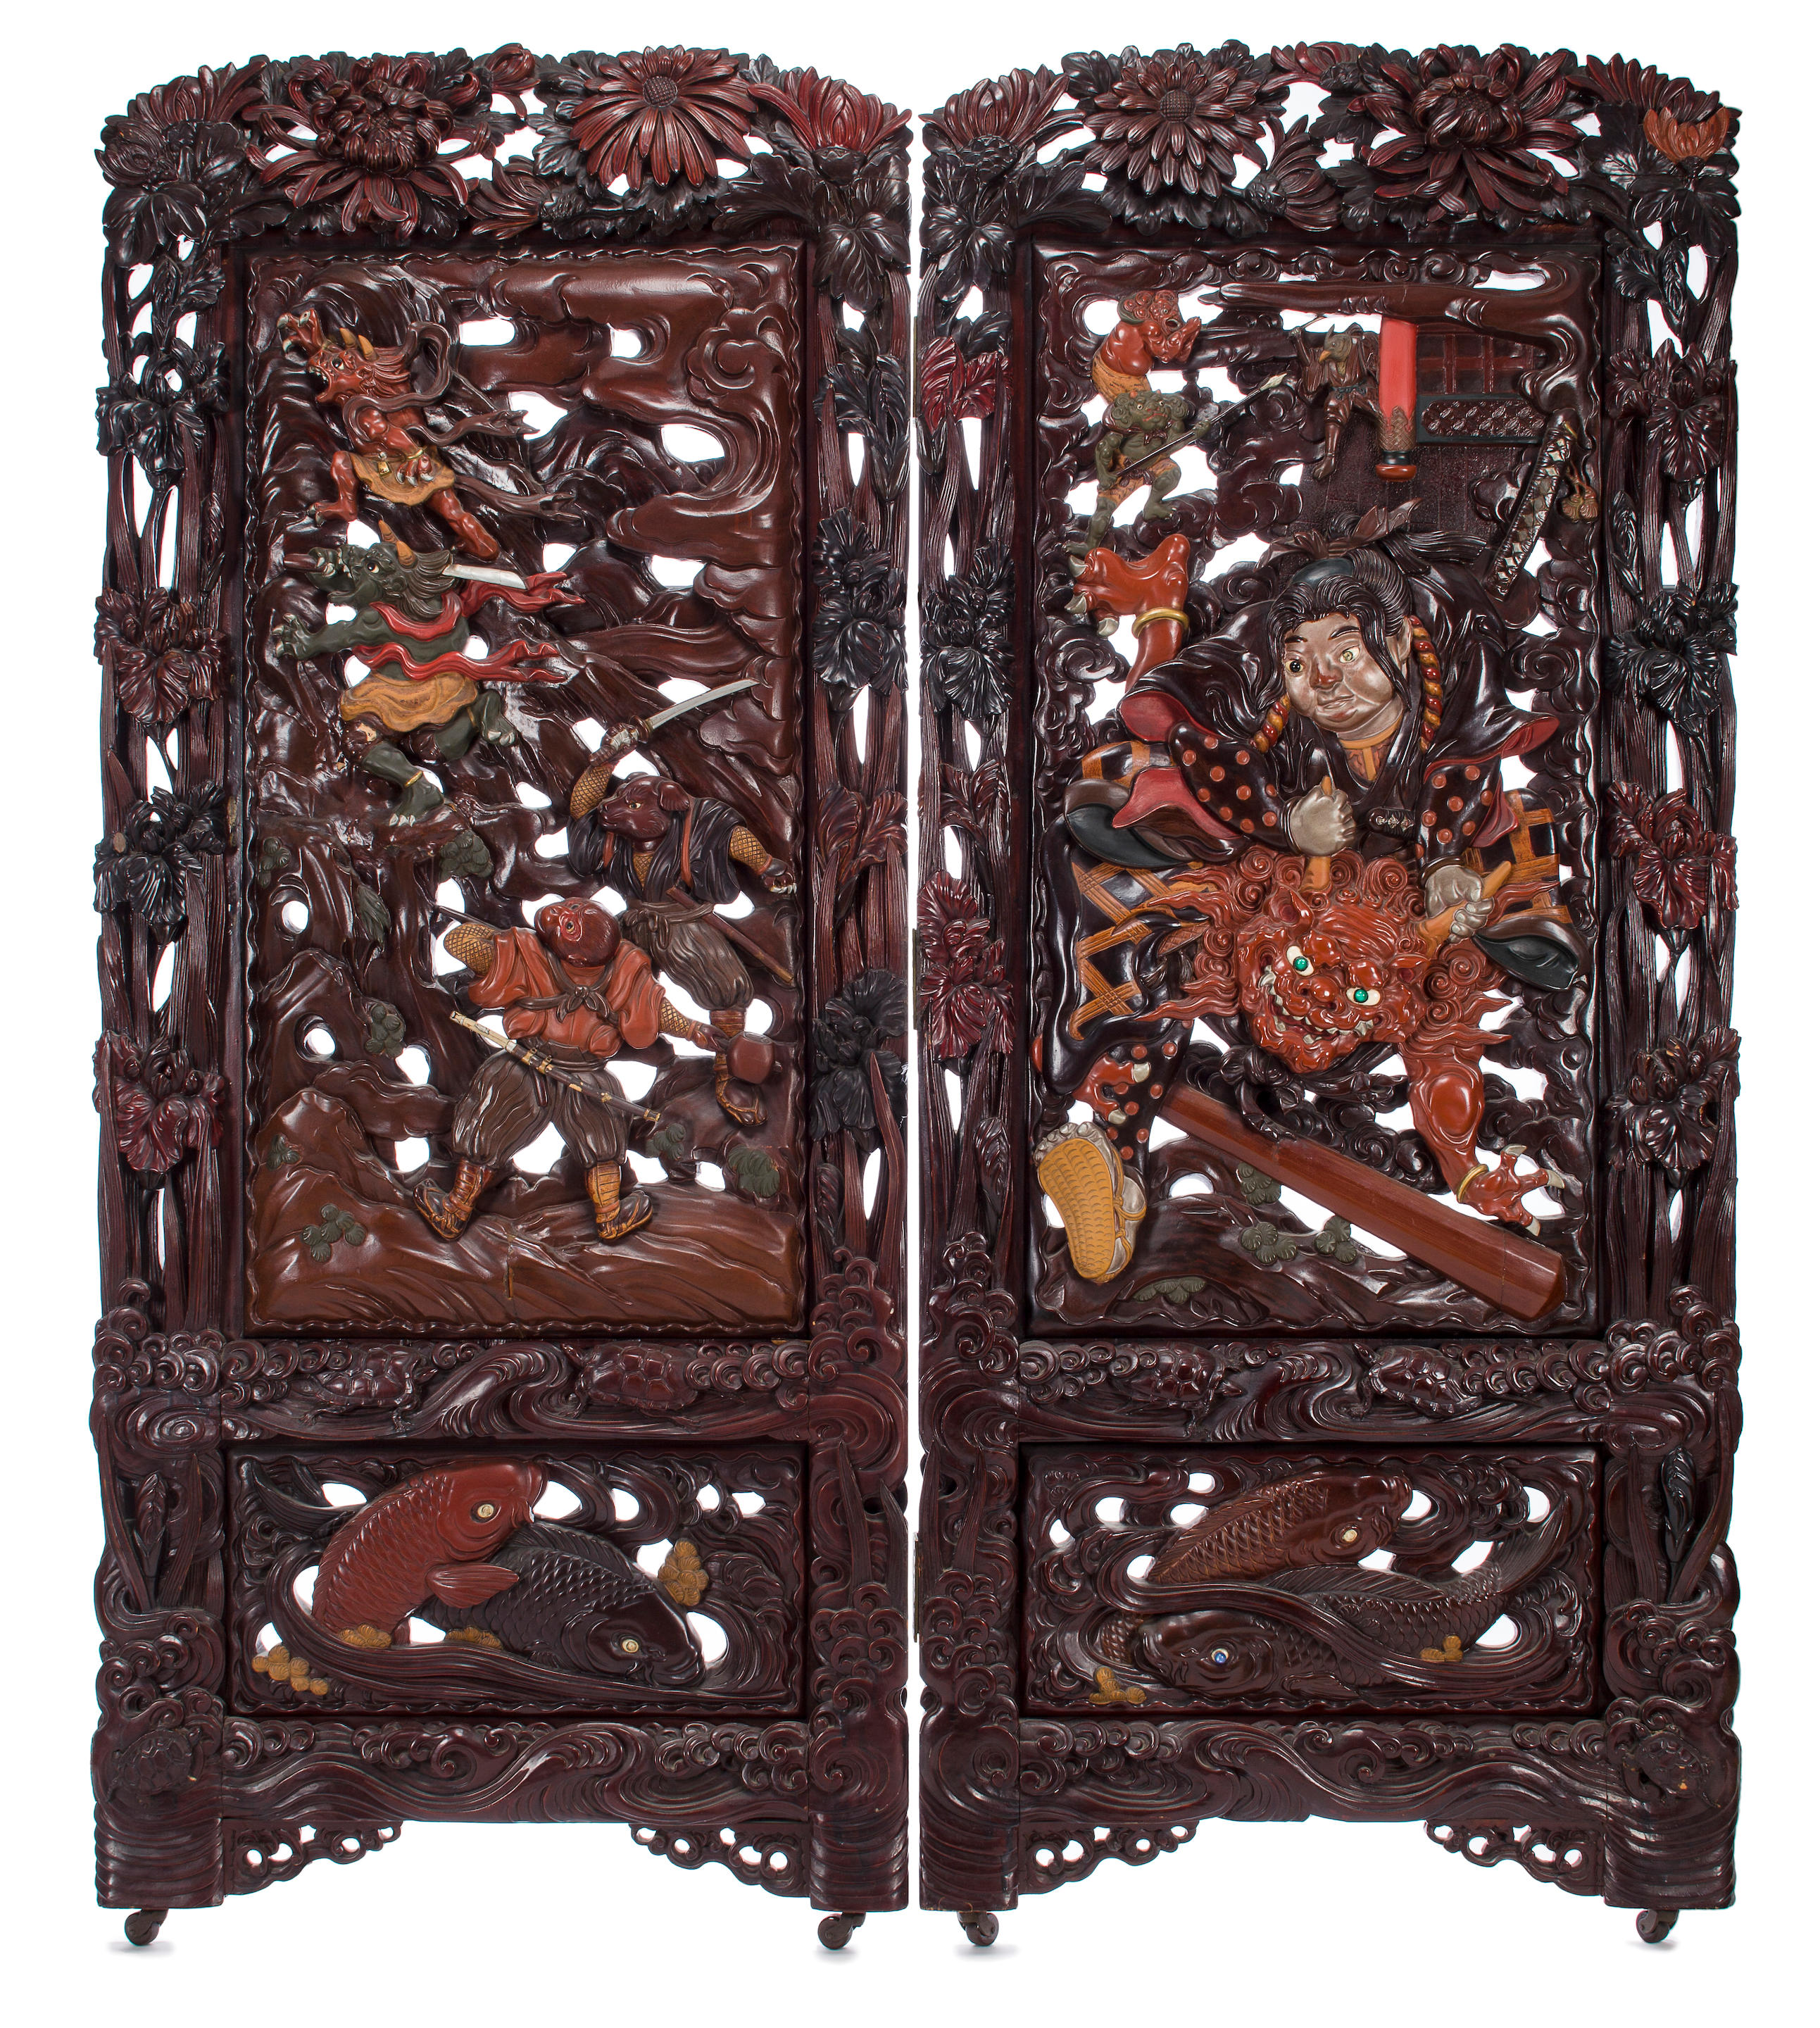 A large and impressive lacquered and carved two-panel wood screen Meiji era (1868-1912), late 19th century